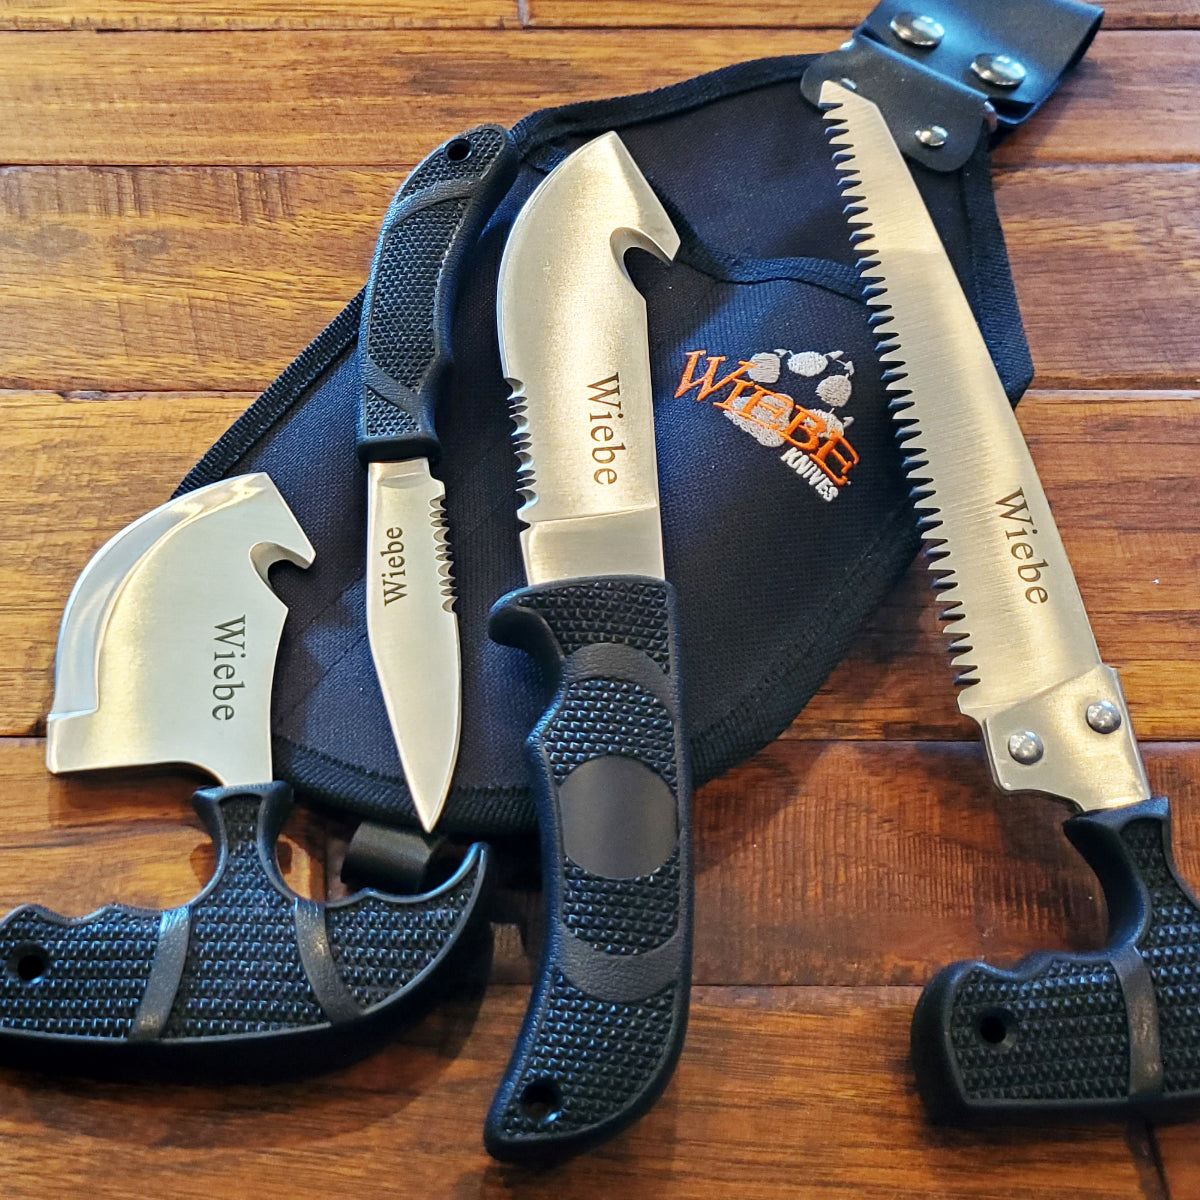 Wiebe Big Game Processing Kit – Wiebe Knives